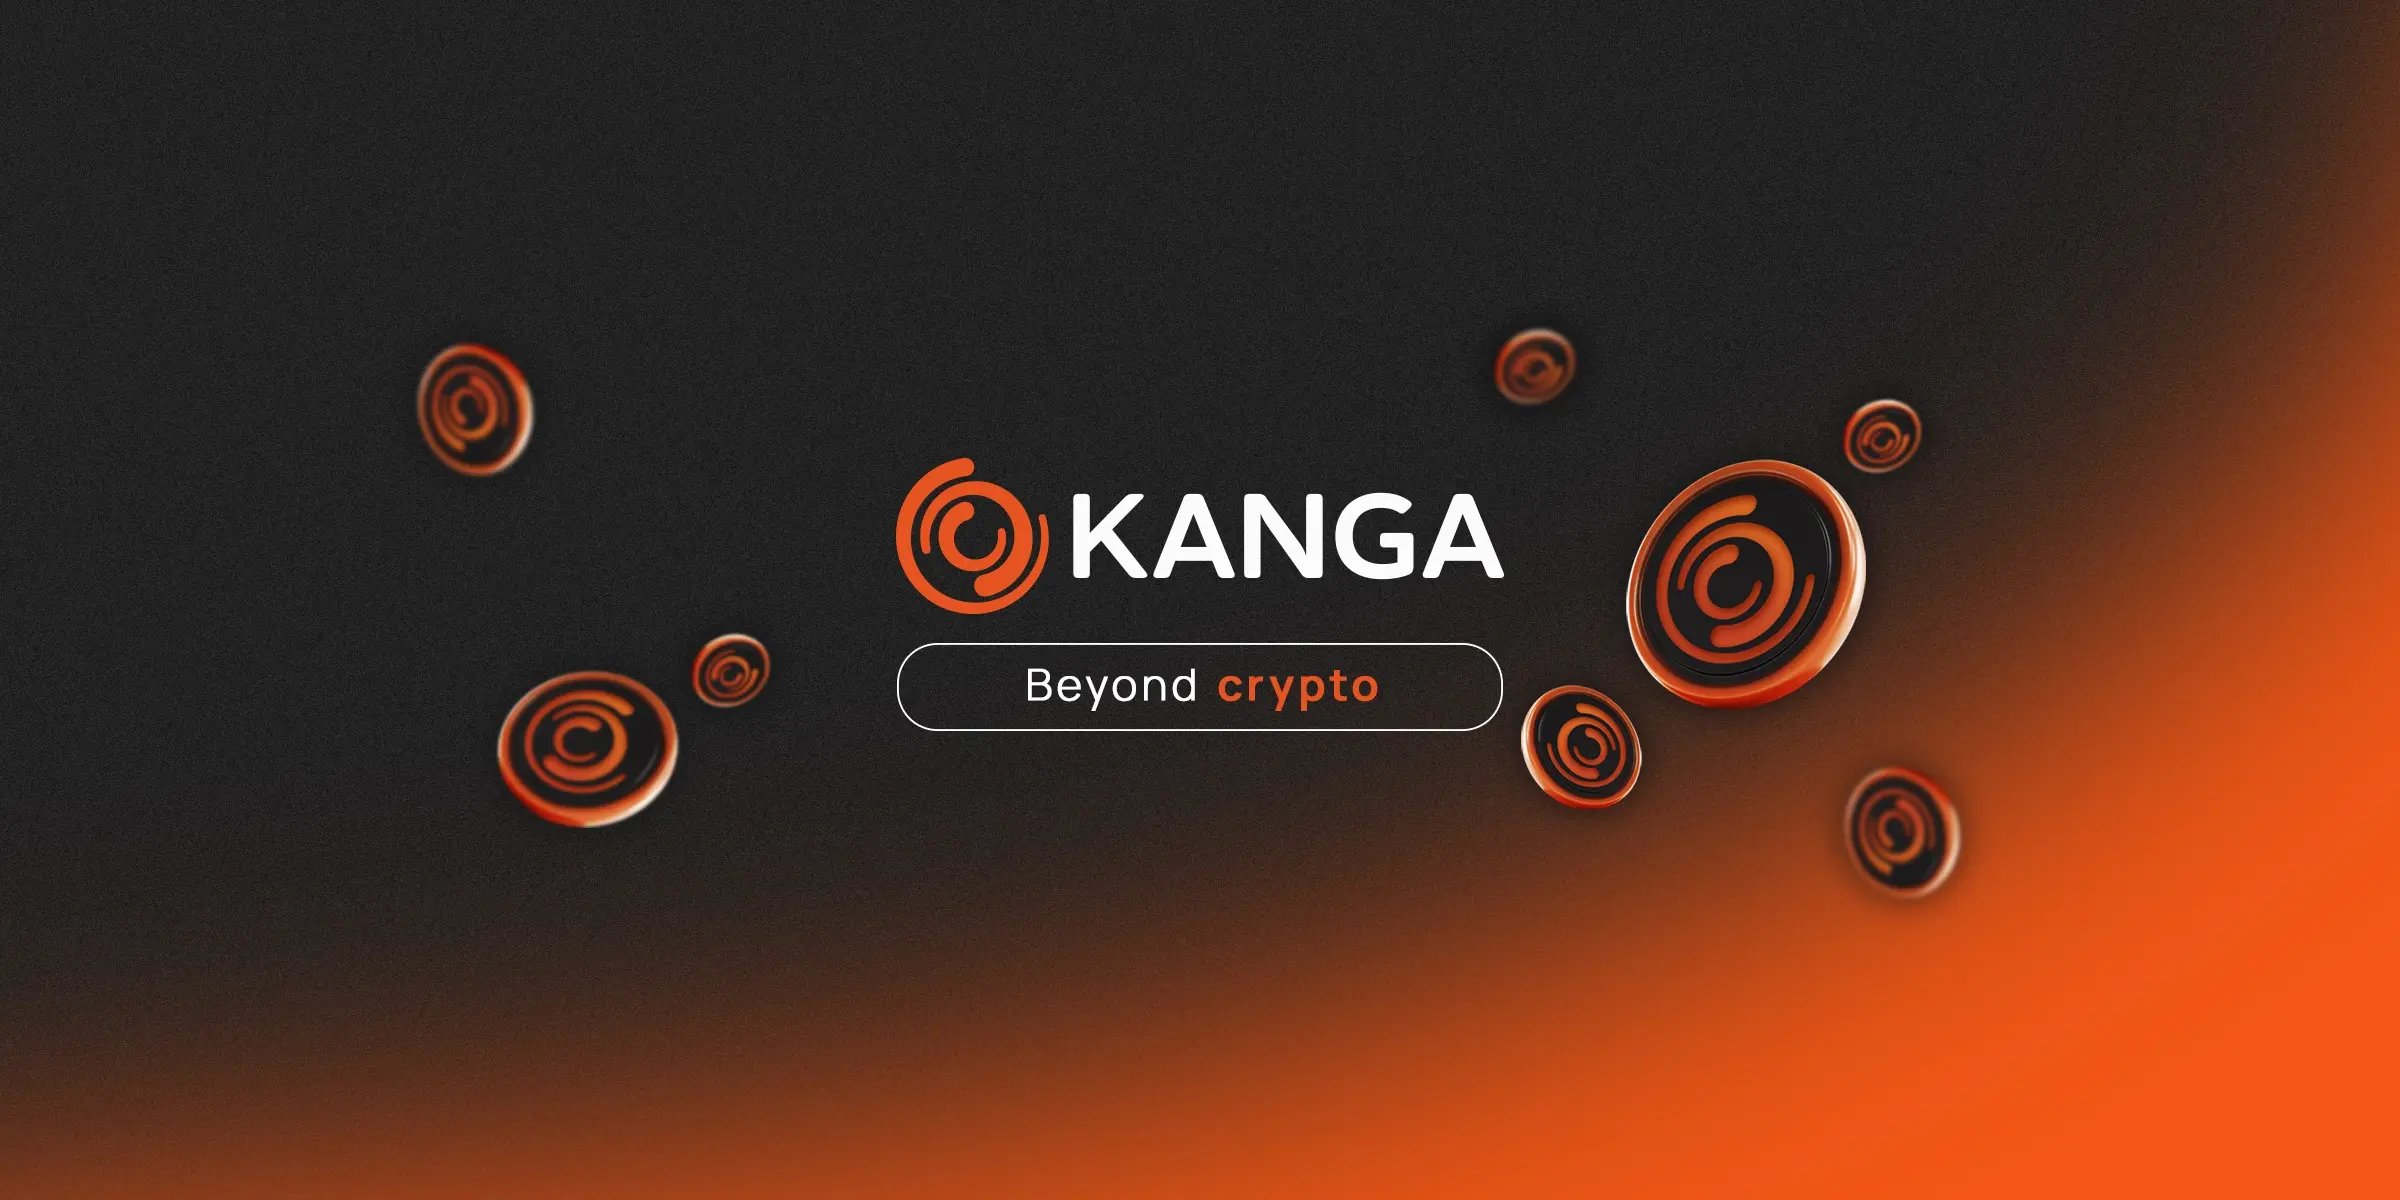 We are entering a new era of cryptocurrency trading with Kanga. Beyond crypto